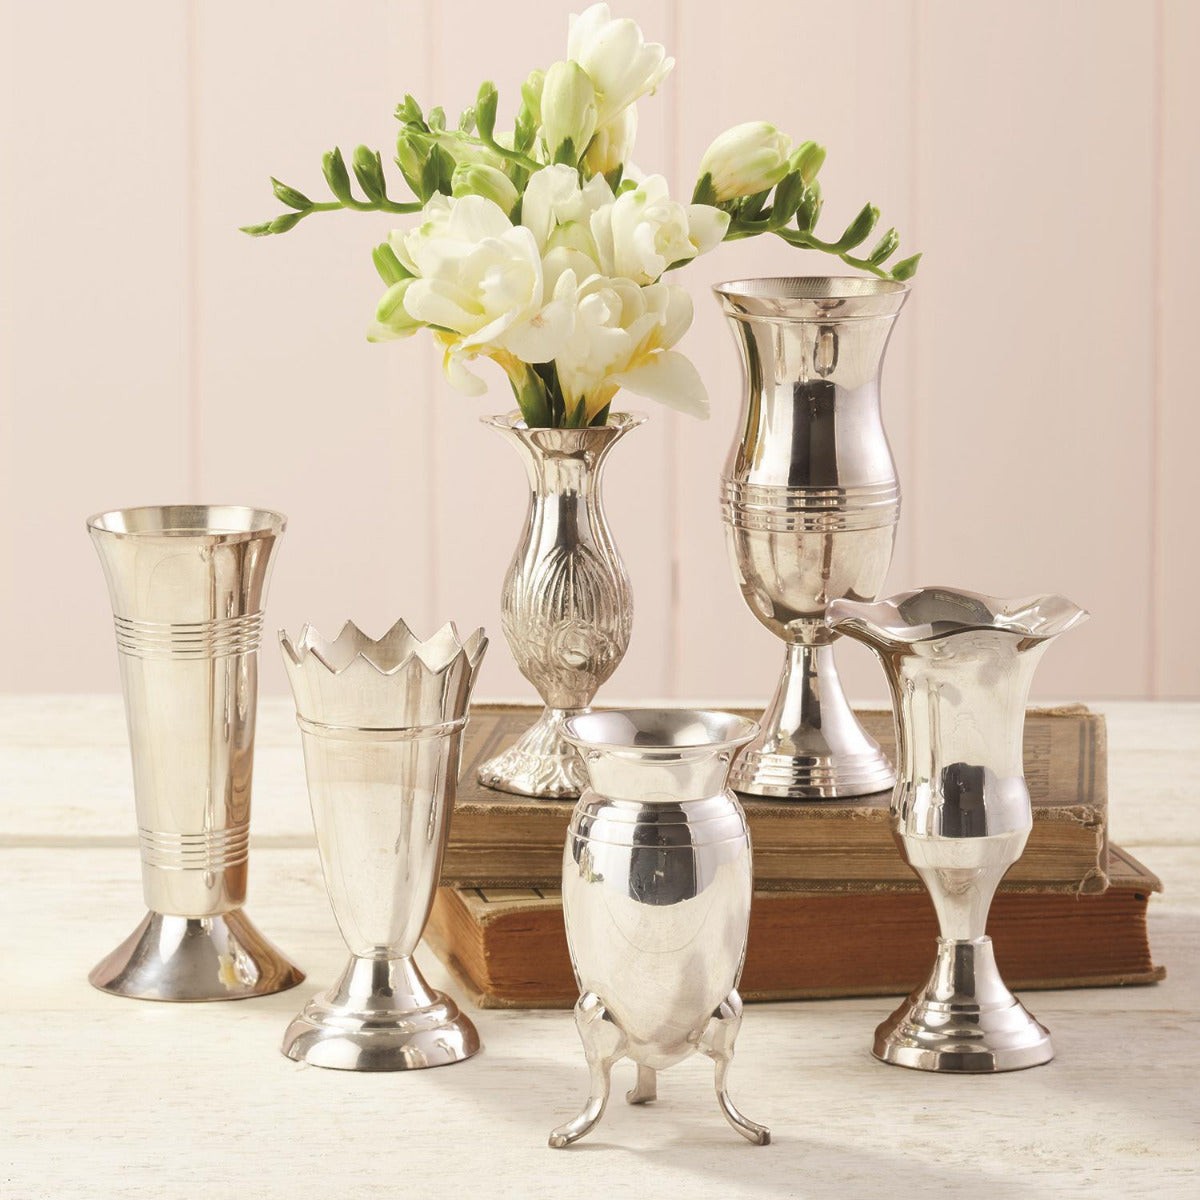 Two's Company Queen Anne's Silver Vases (set of 6)